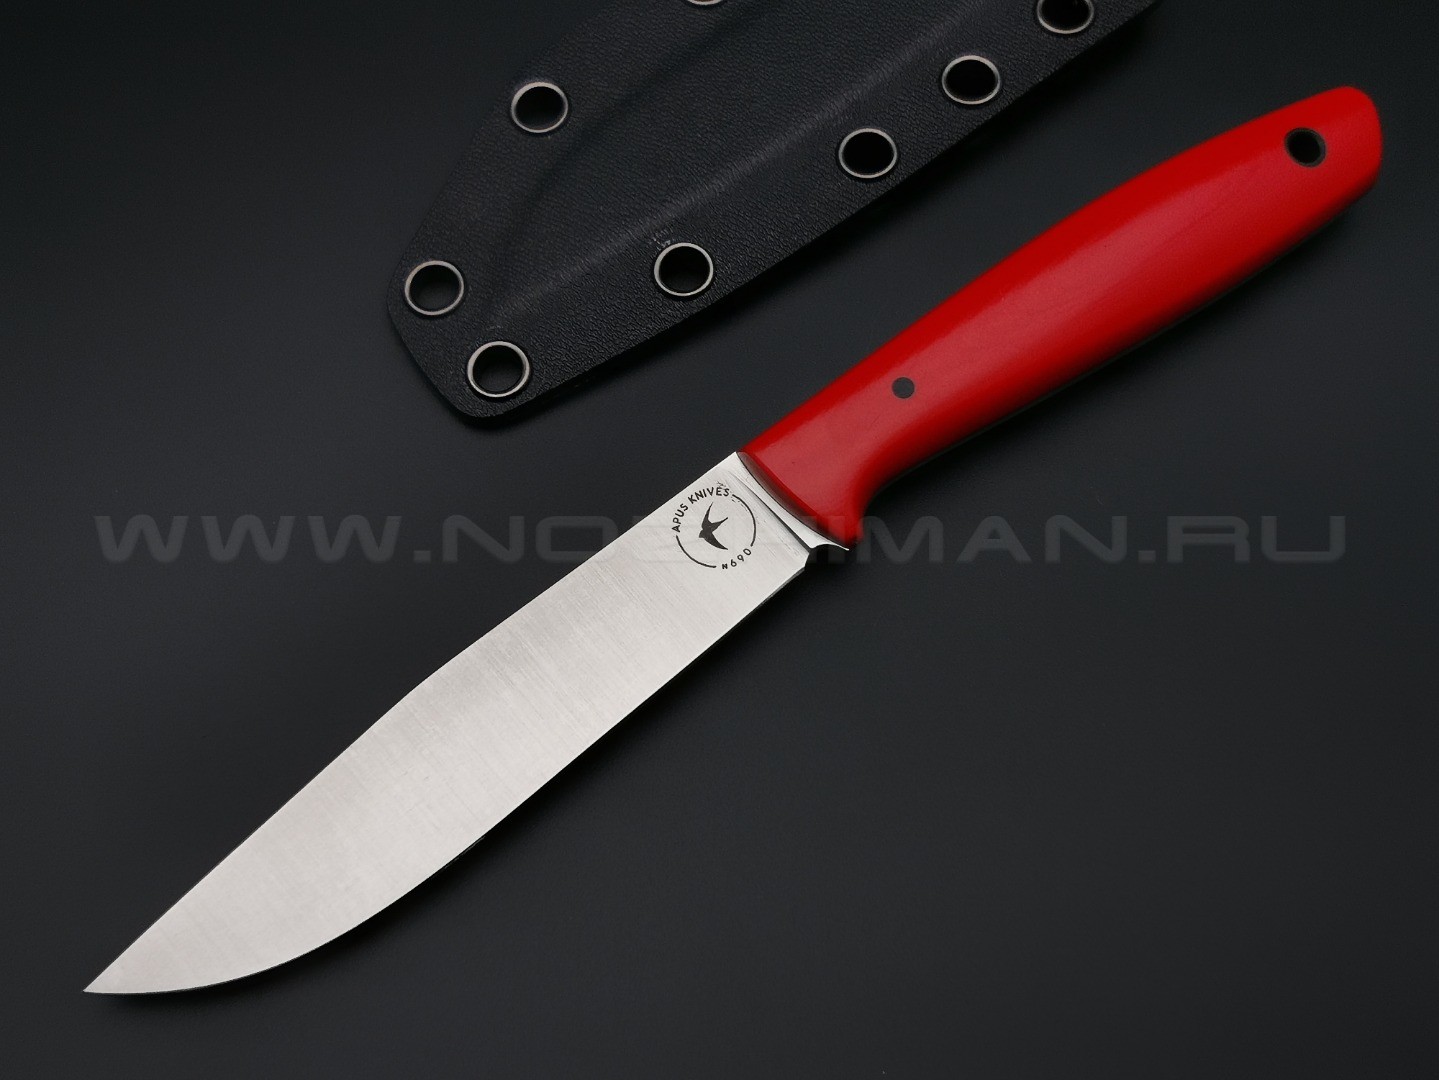 Apus Knives нож Toothpick сталь N690, рукоять G10 red